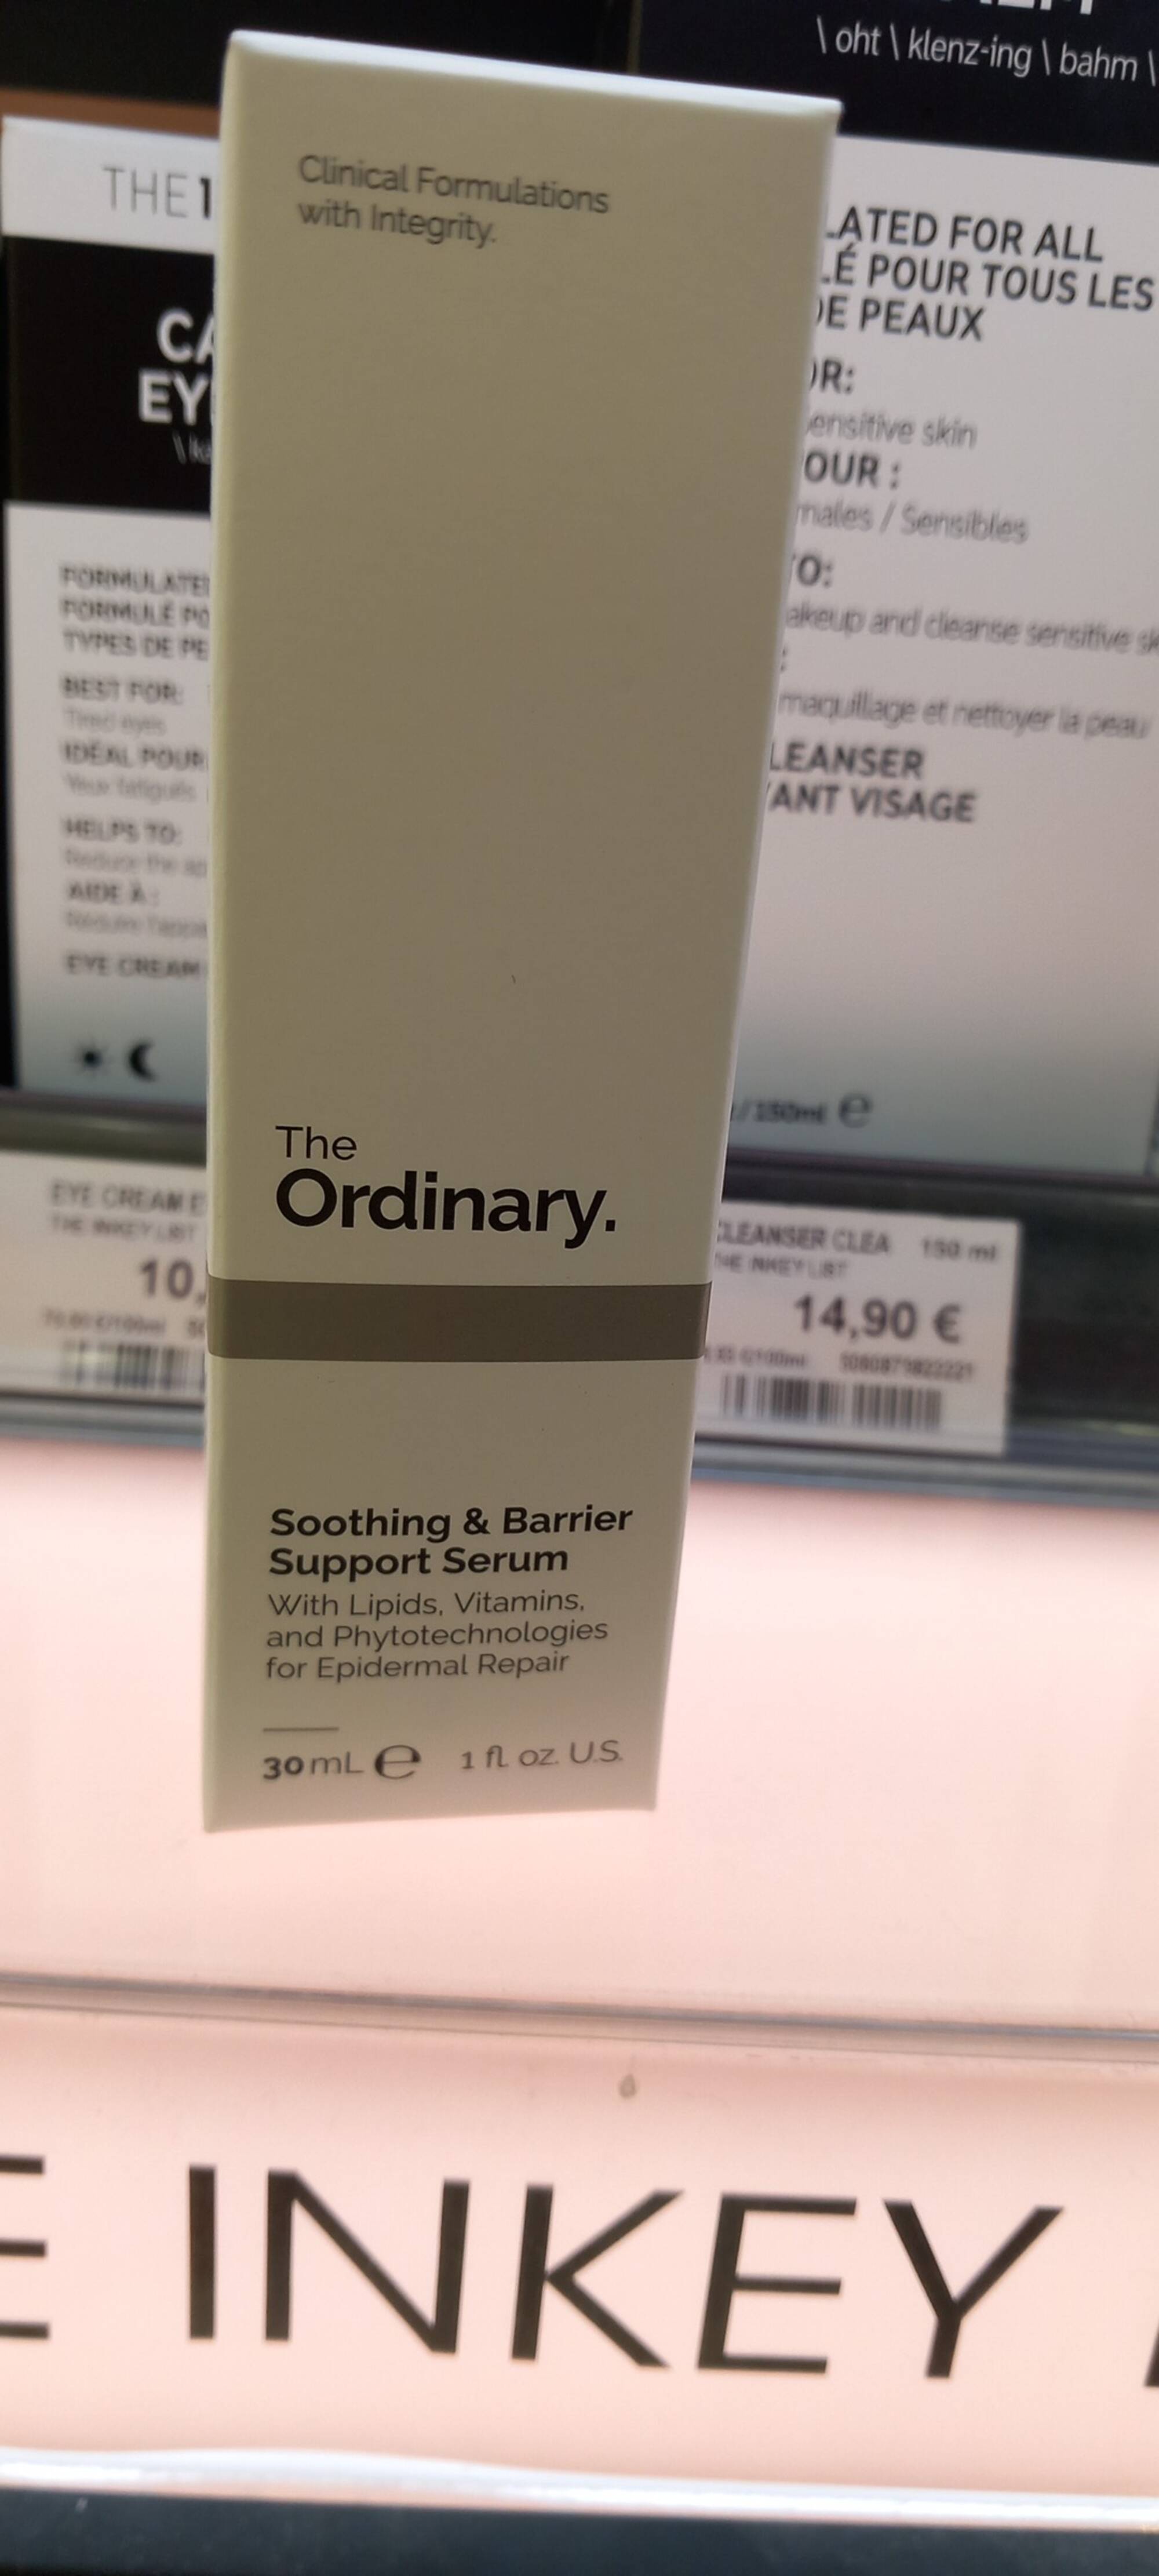 THE ORDINARY - Soothing & barrier_support serum